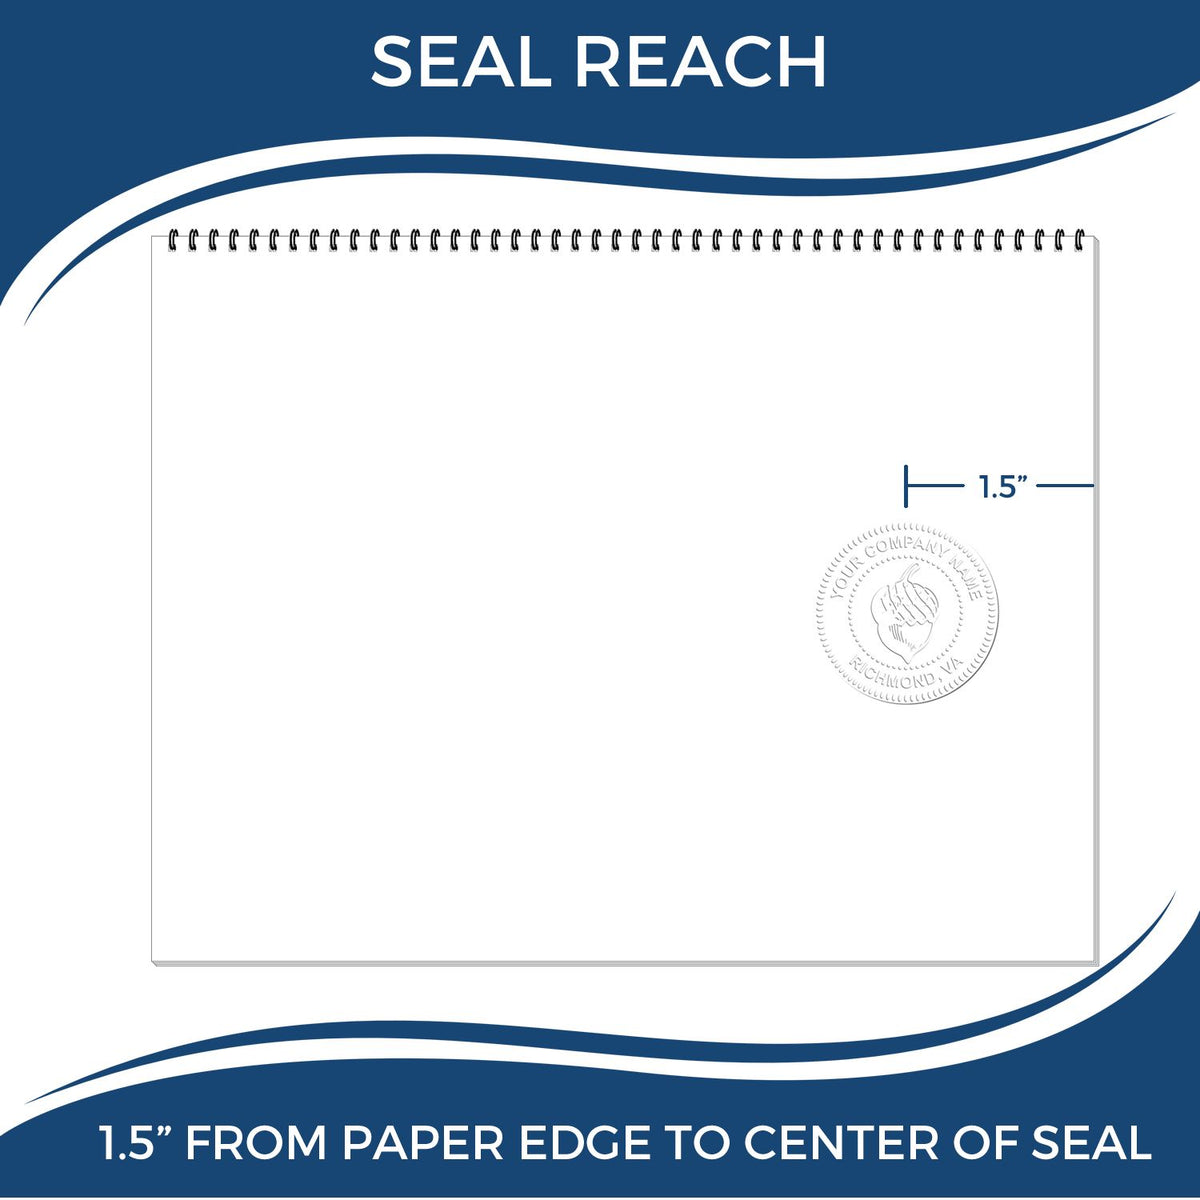 An infographic showing the seal reach which is represented by a ruler and a miniature seal image of the Gift Vermont Engineer Seal